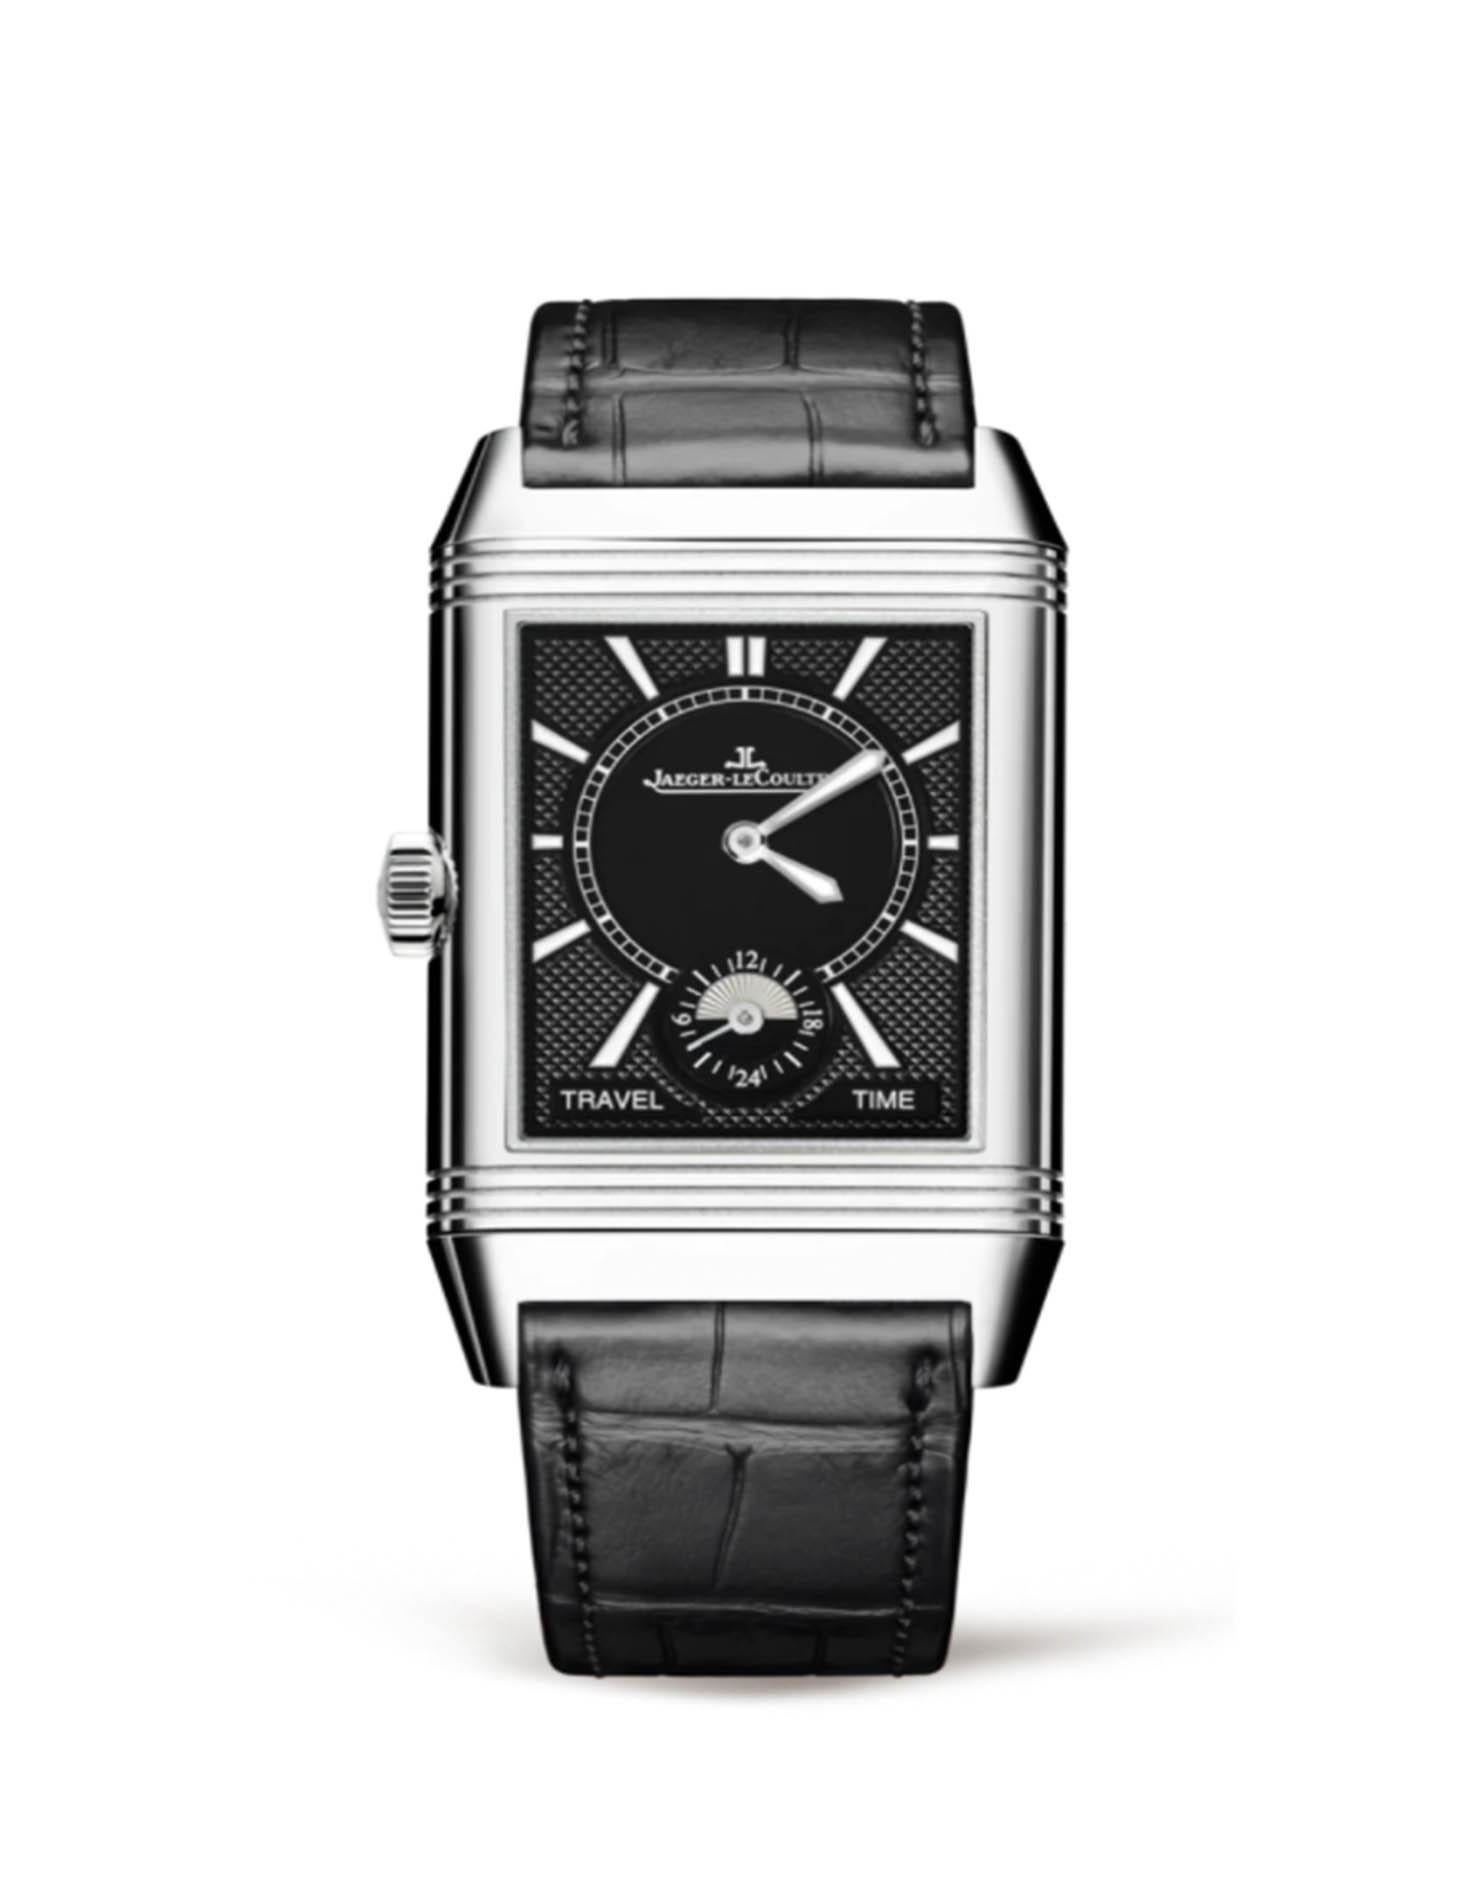 Jaeger-LeCoultre Men's Reverso Classic Large Duoface Hand-Wound 28mm Stainless Steel & Alligator Watch. Features classic face, or swivel the case over to reveal a more contrasting face that offers a second time zone, perfect for any traveler.